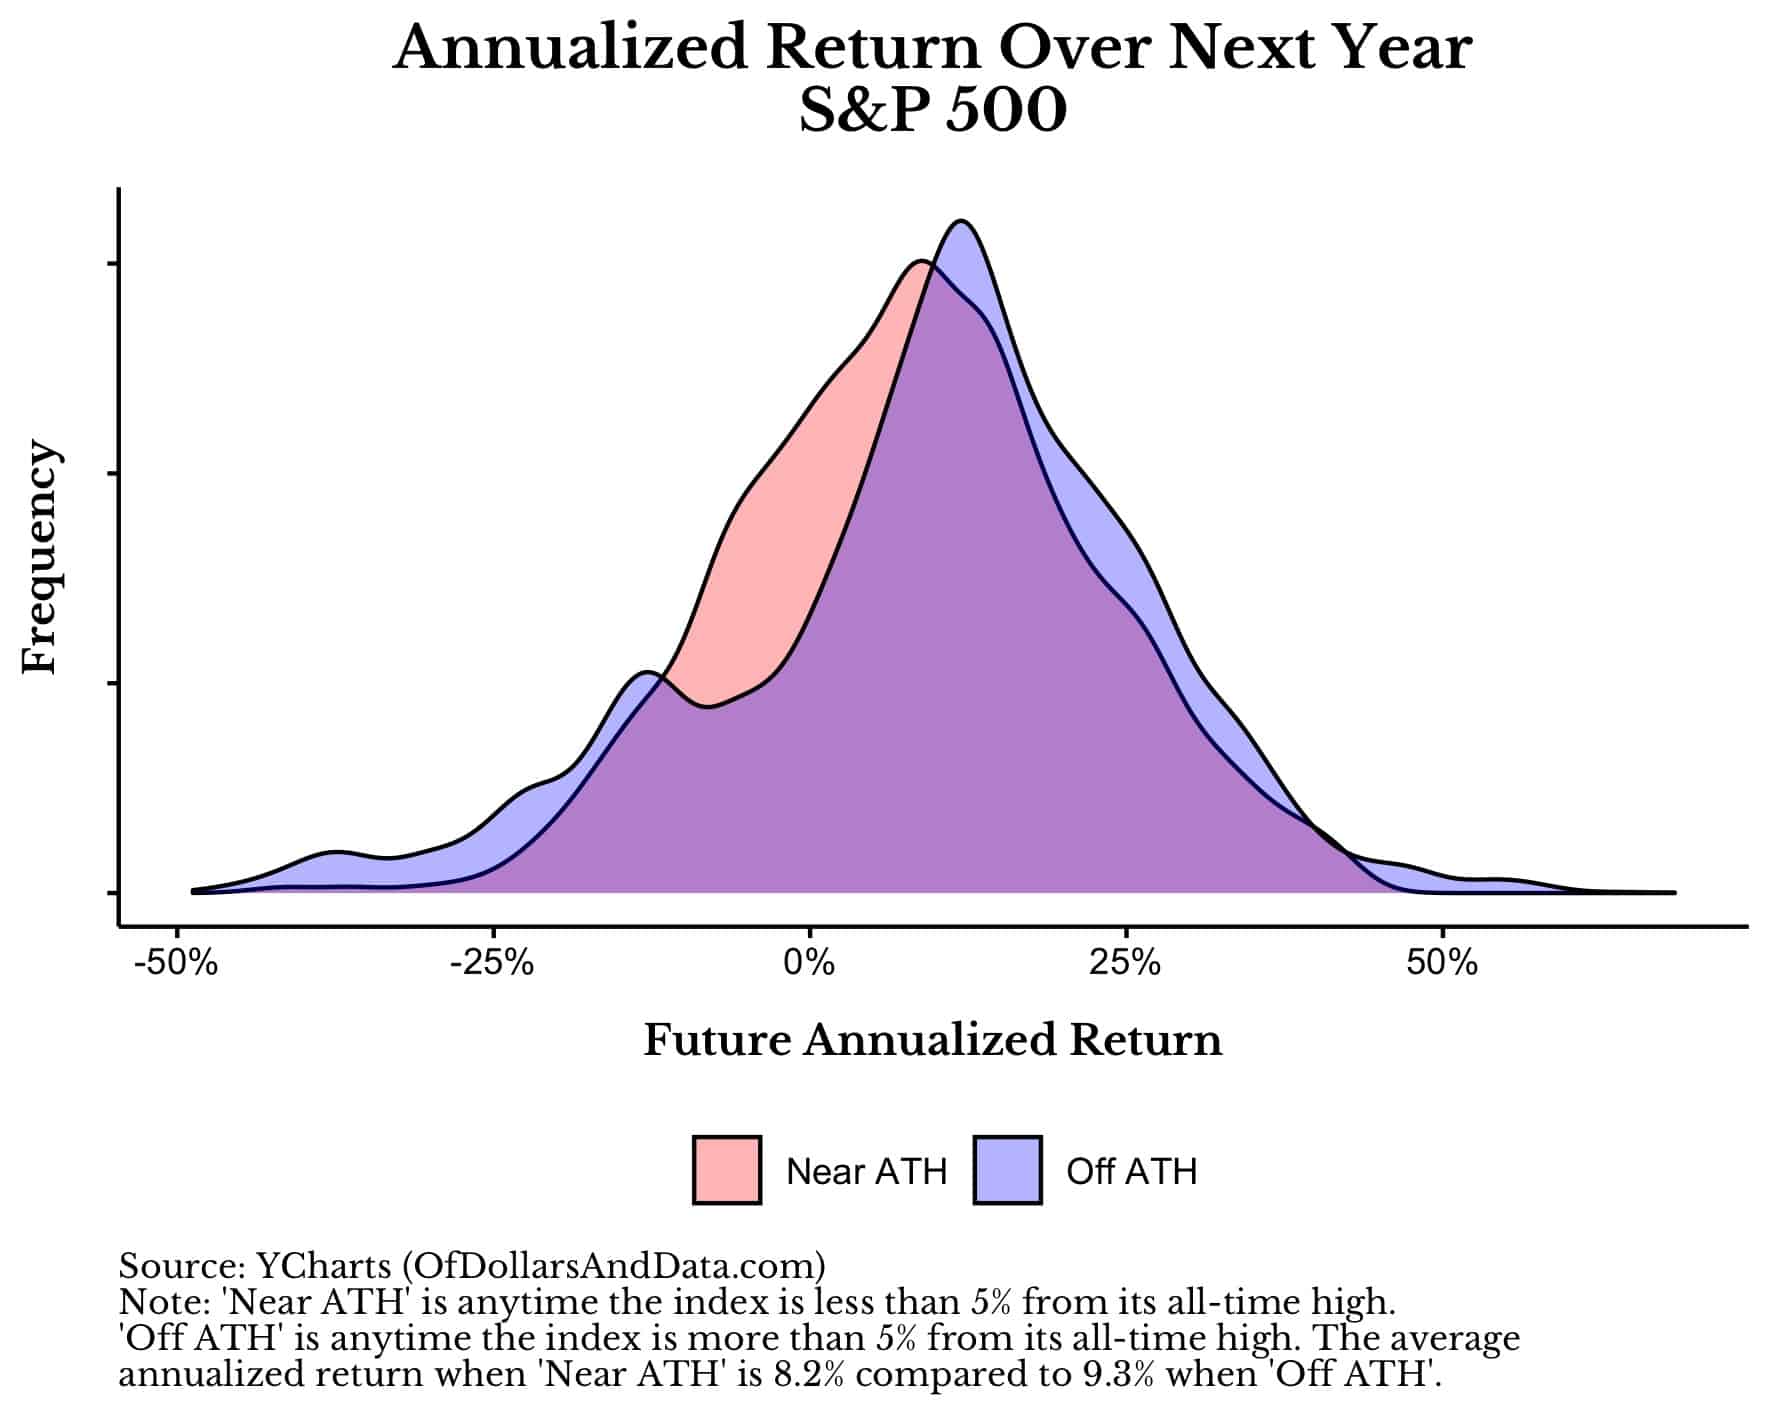 Annualized return distributions for the S&P 500 over the next year near and off all-time highs